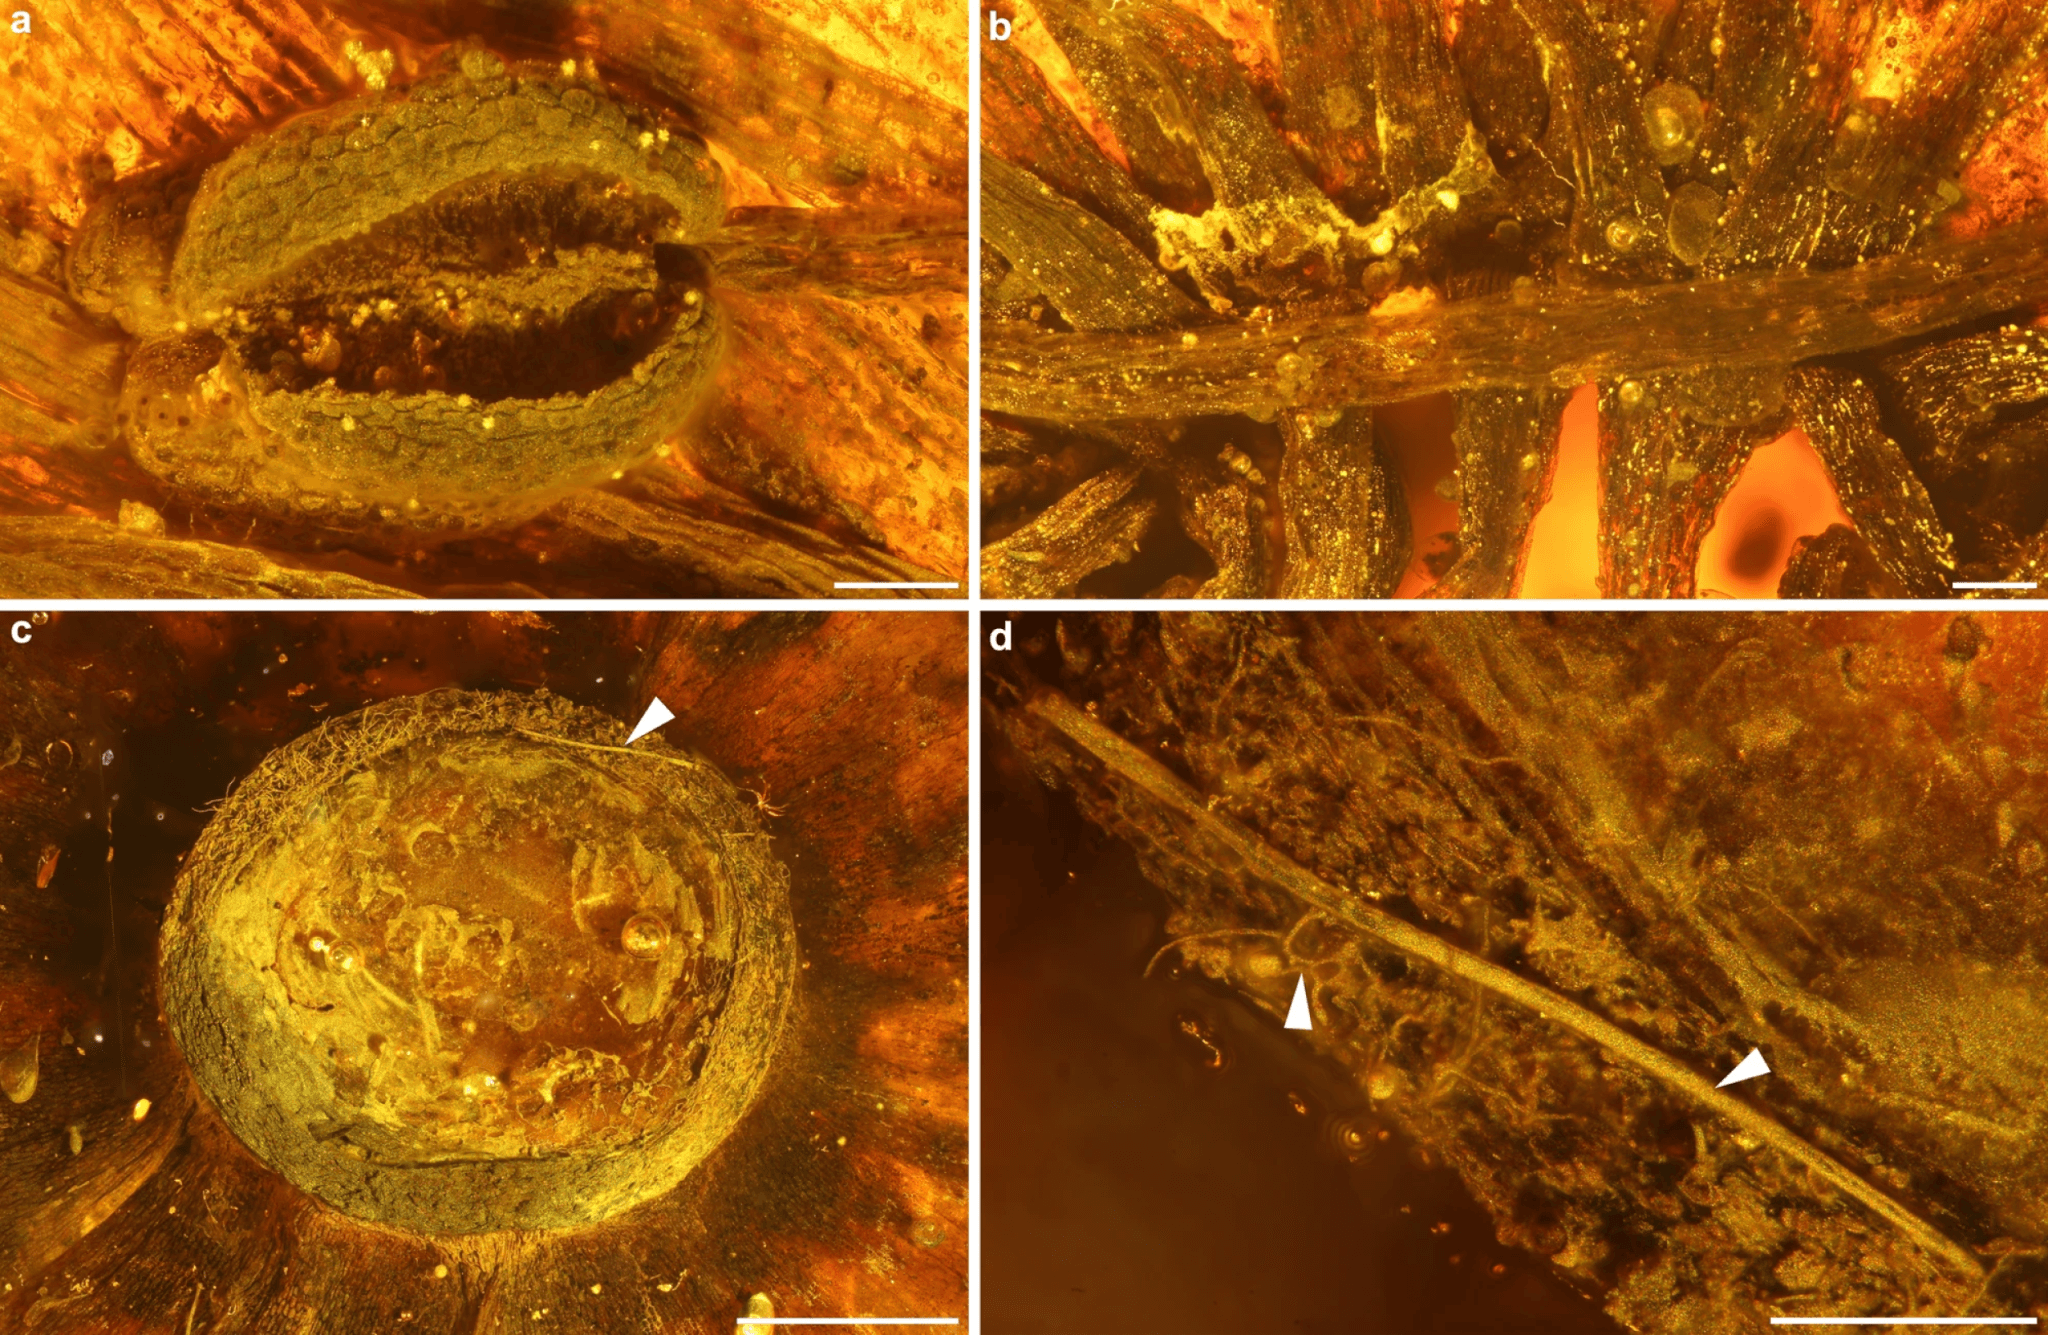 The largest flower ever found trapped in amber from millions of years ago.